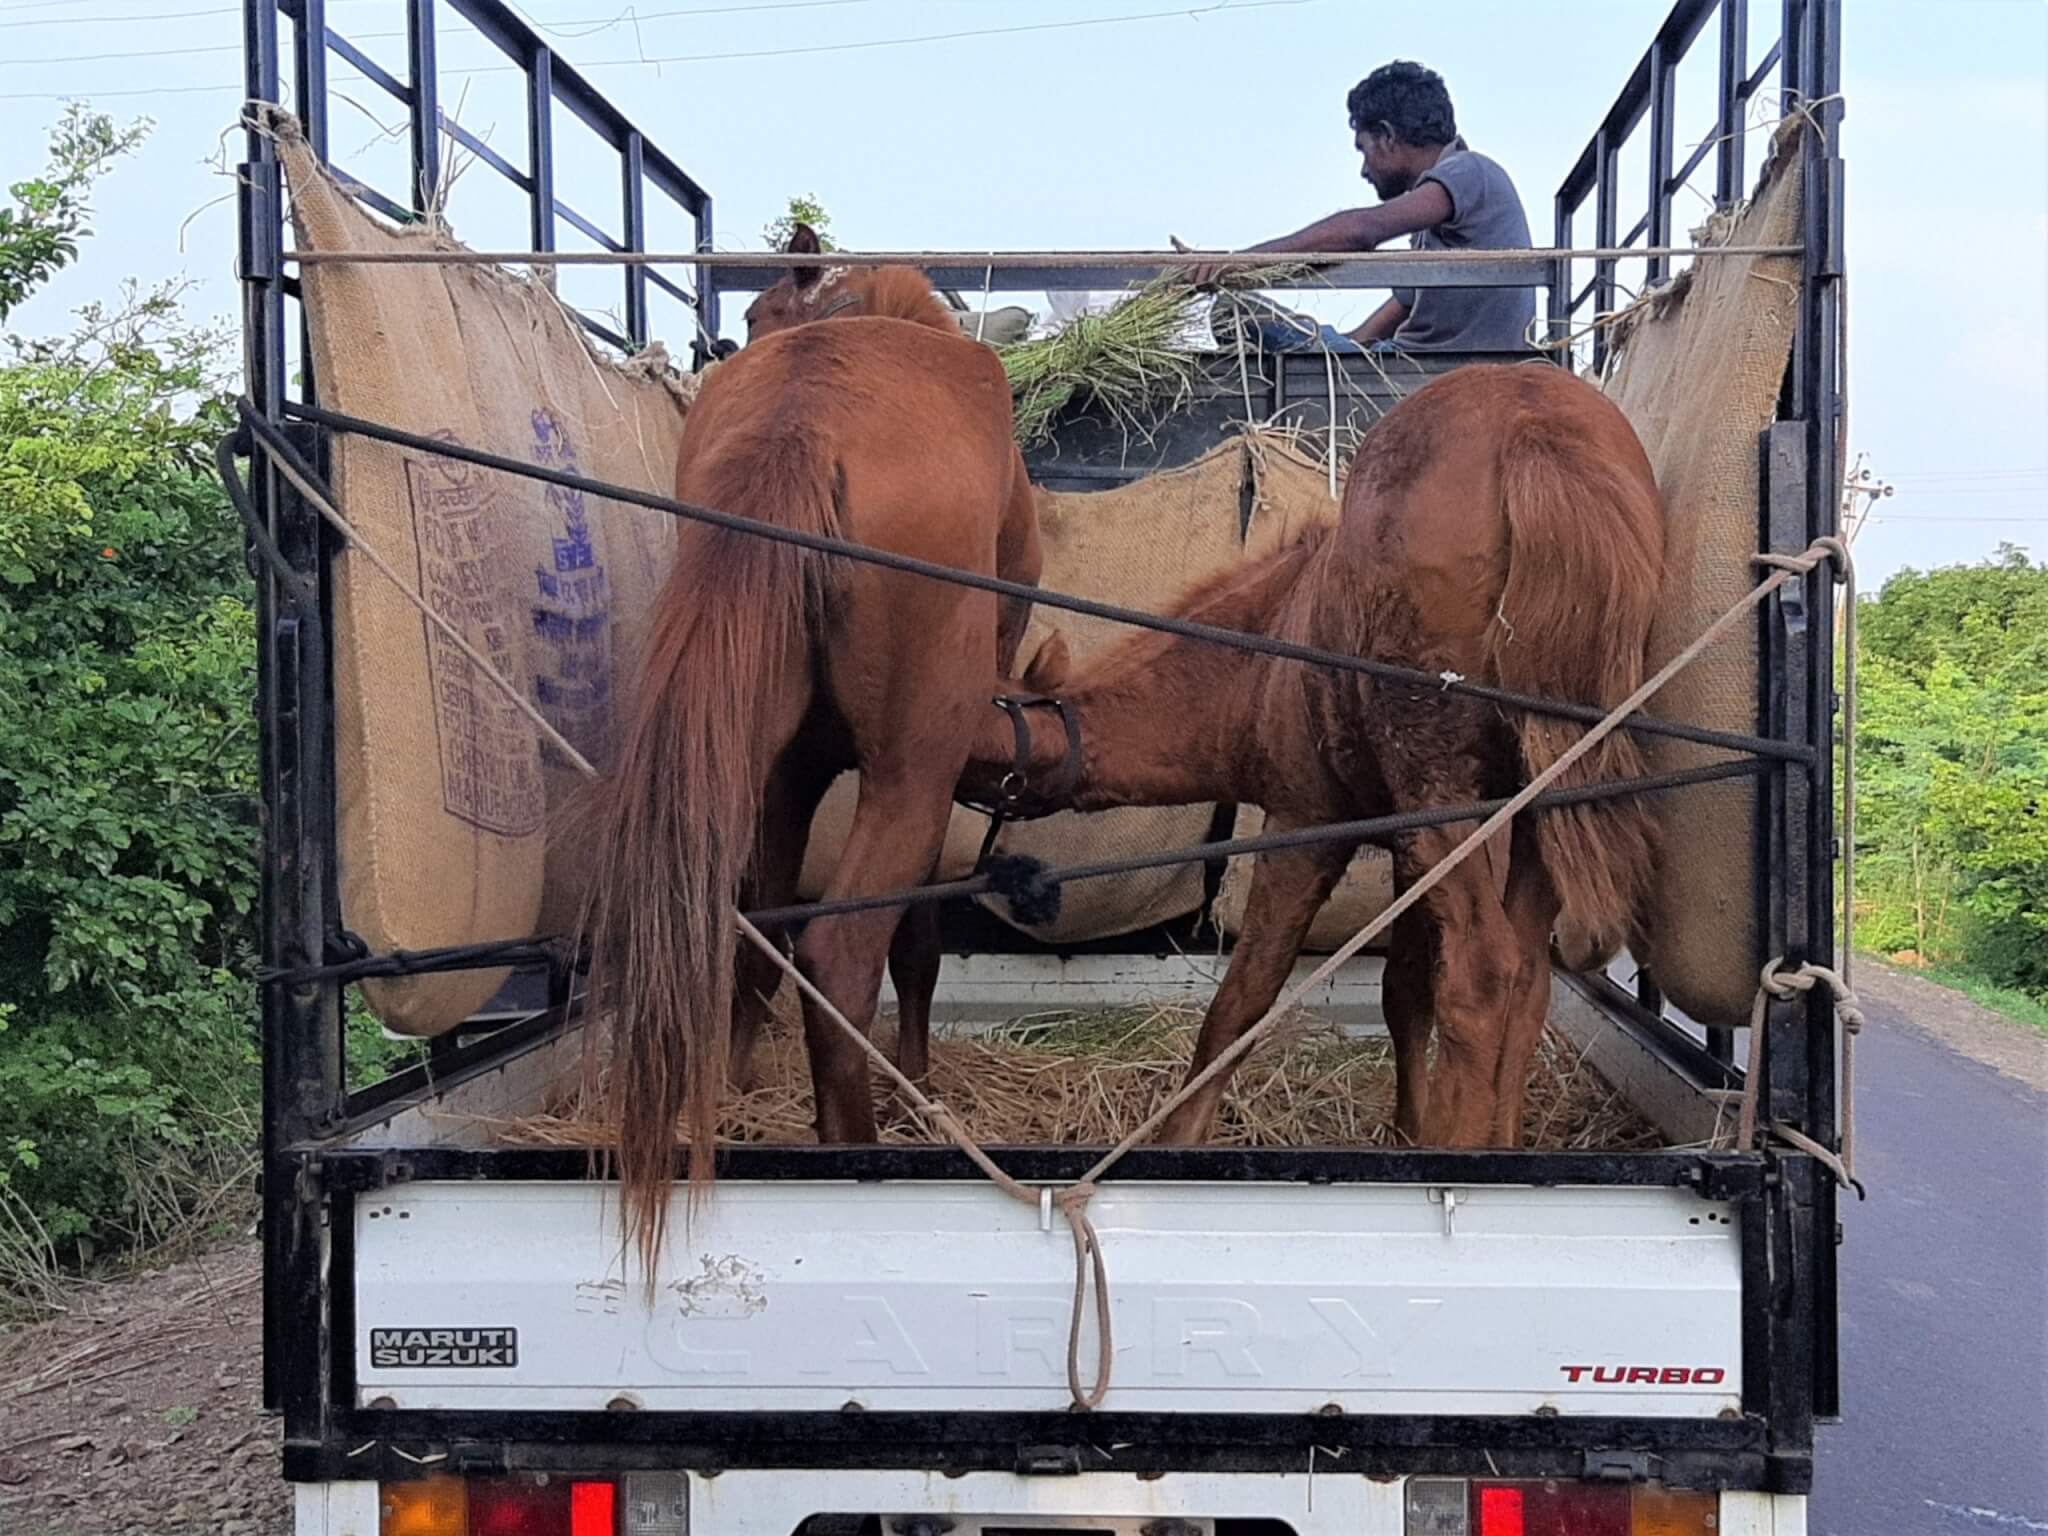 Sangeeta and her foal ride in the back of a truck to their new home at Animal Rahat's sanctuary.